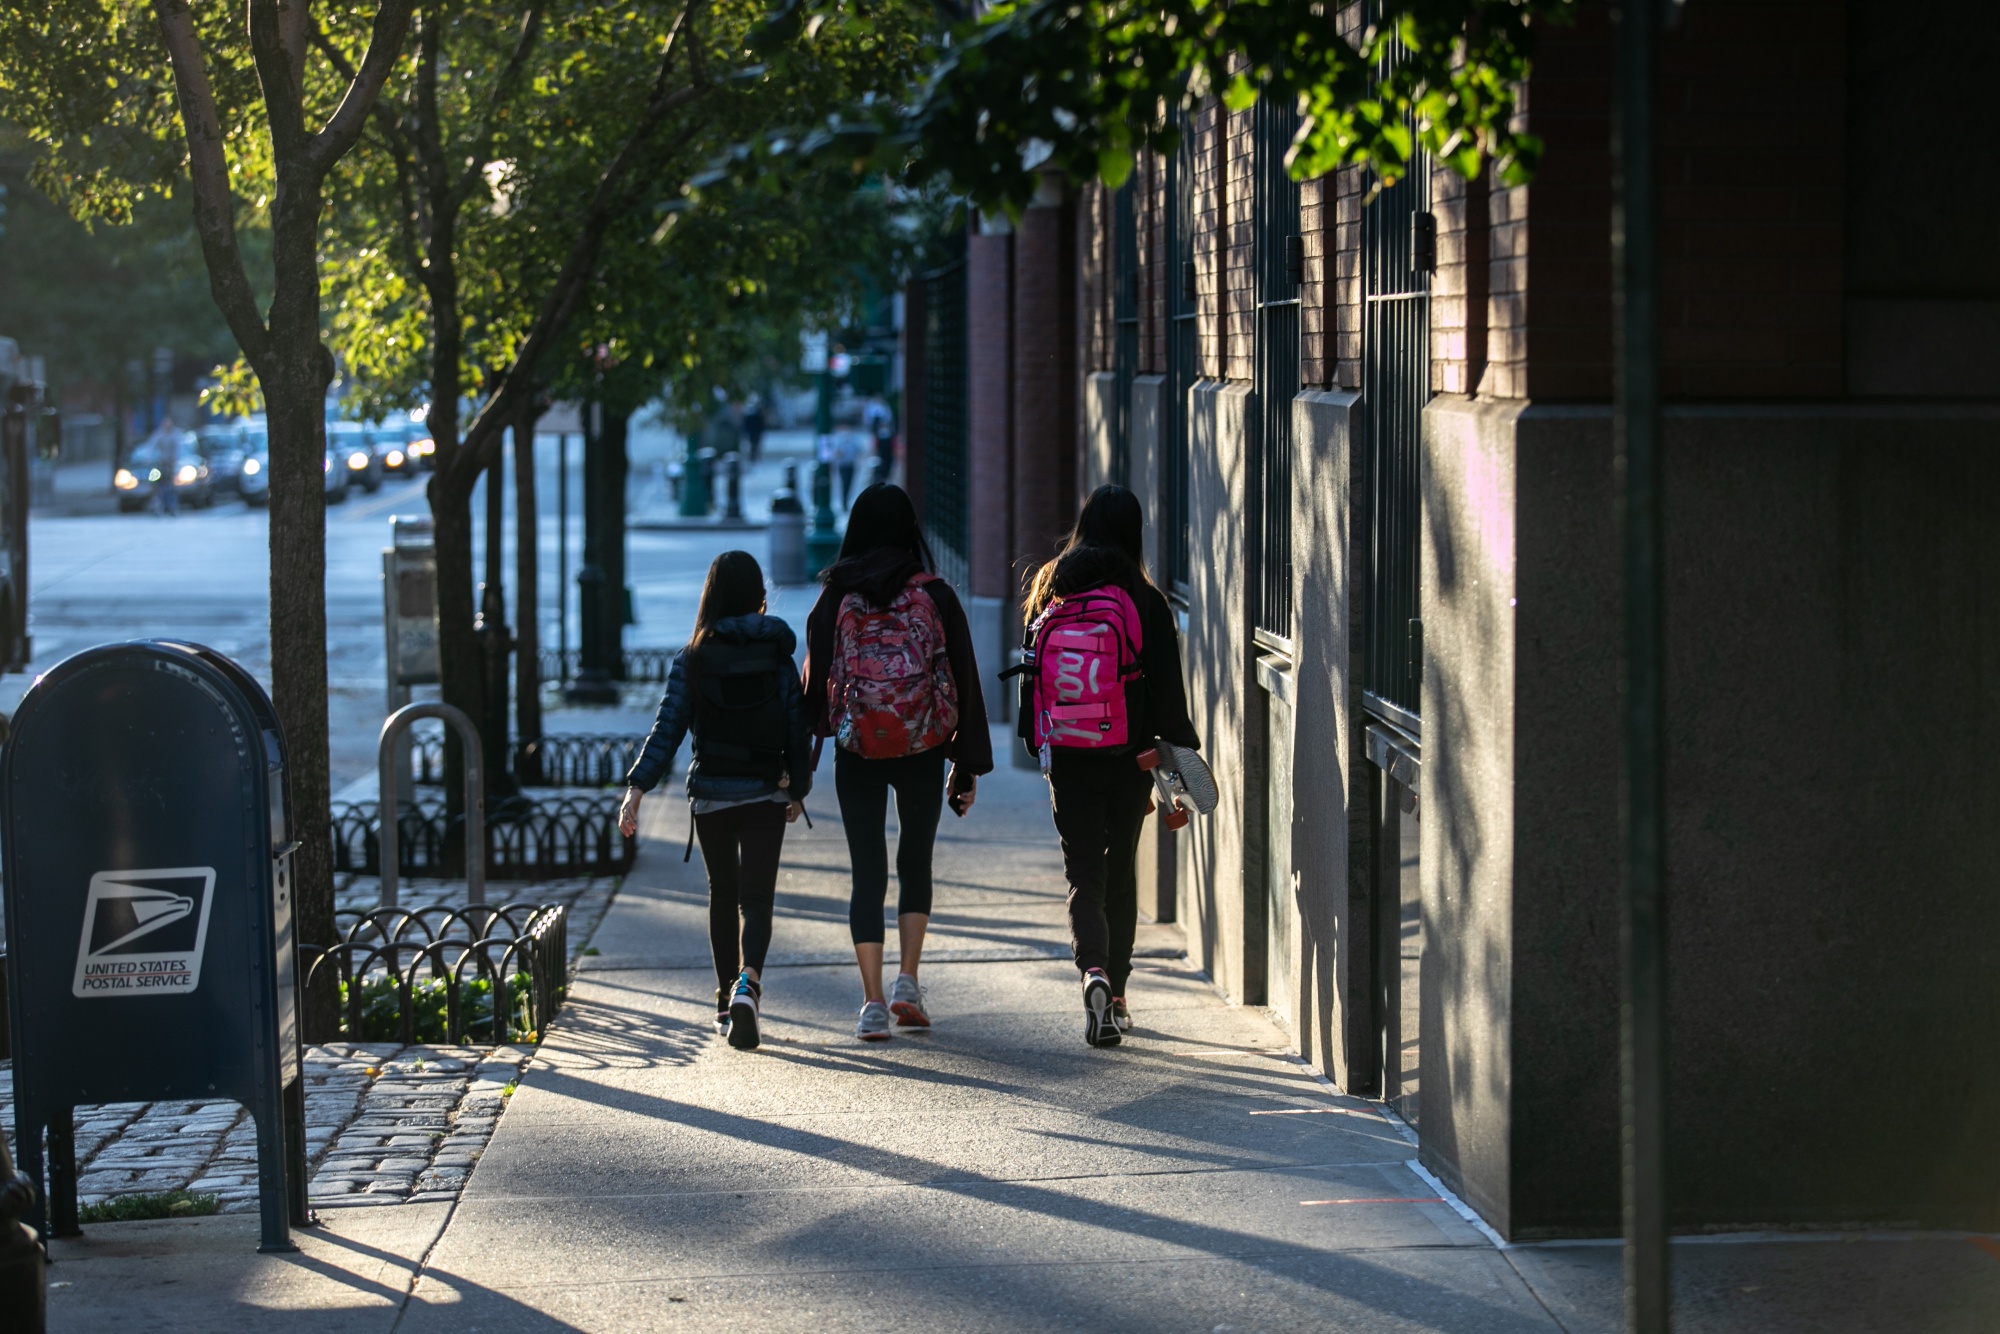 Students walk along a street in New York.